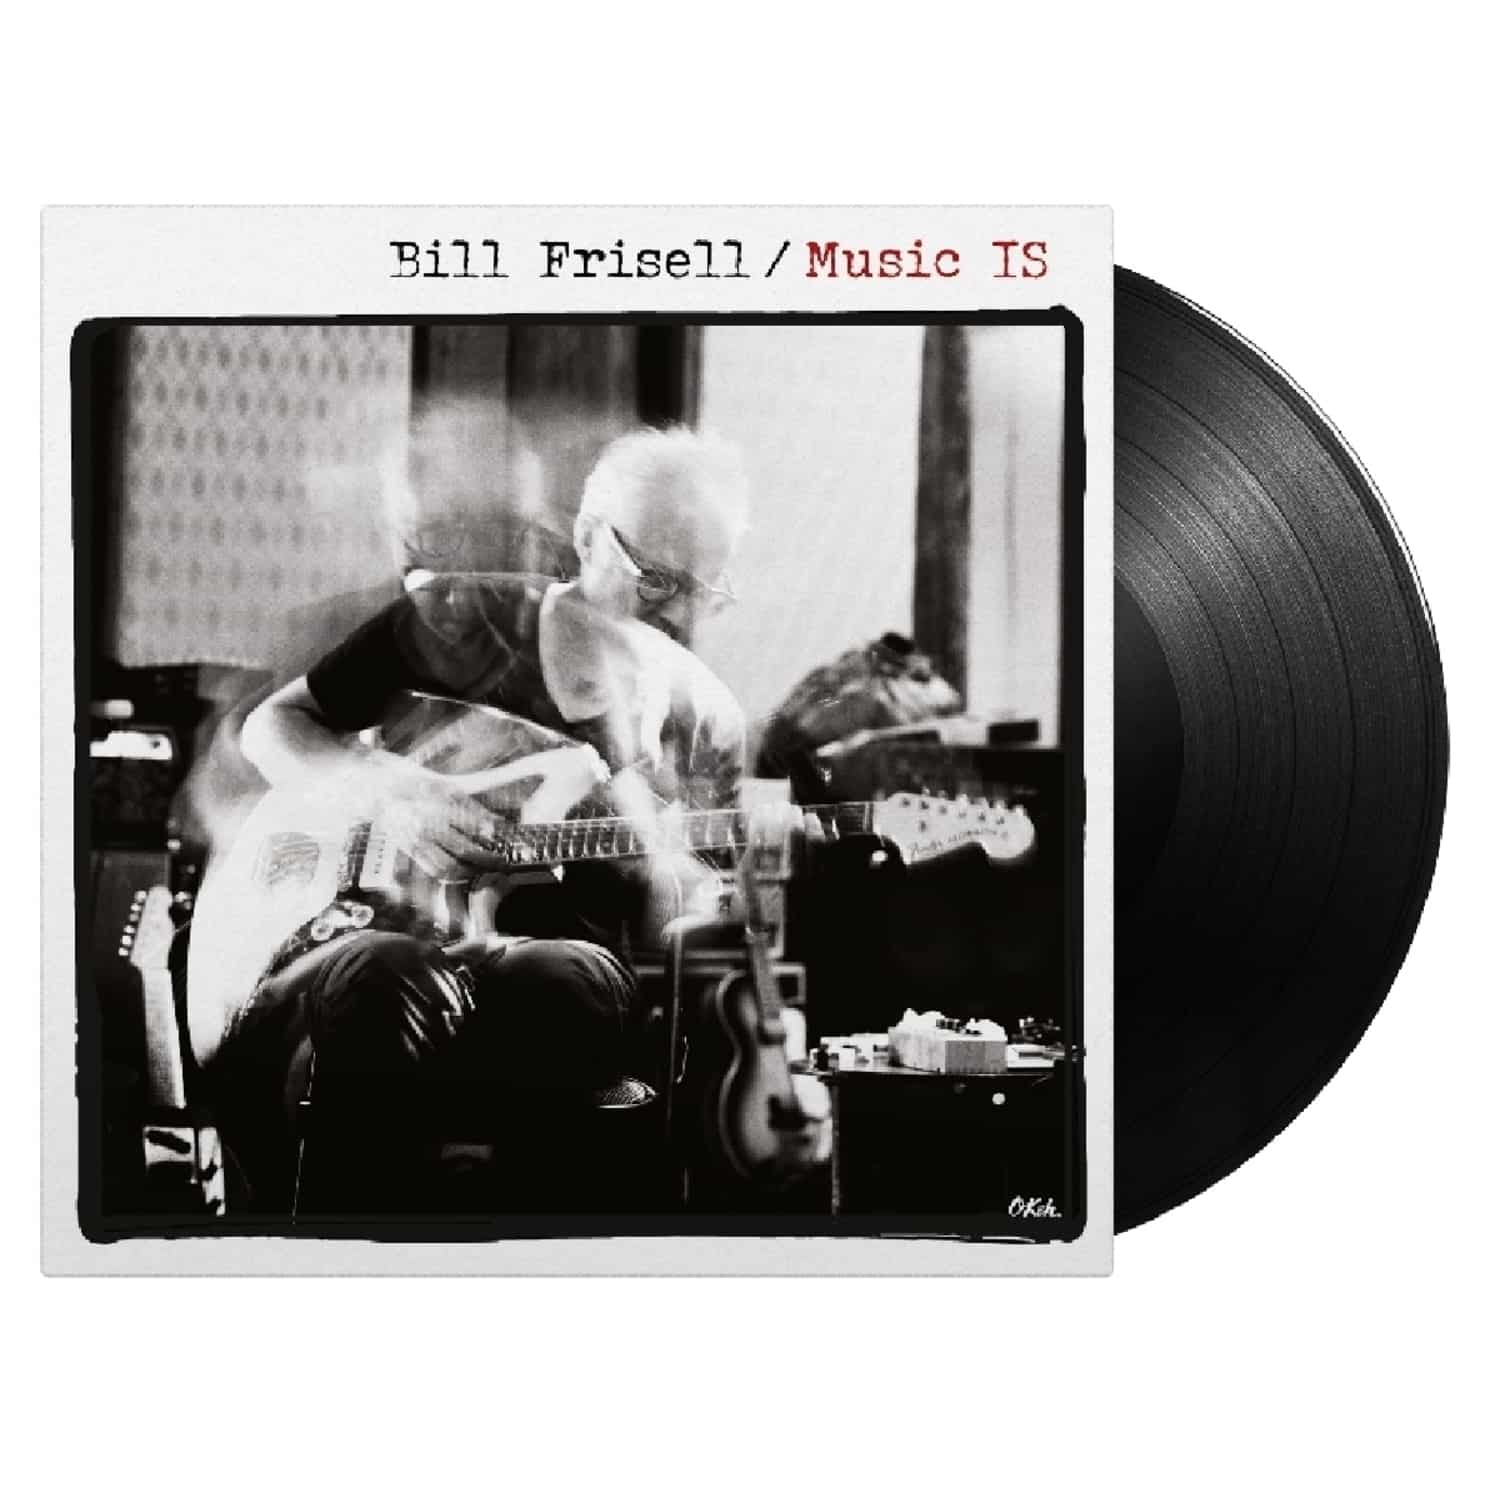 Bill Frisell - MUSIC IS 